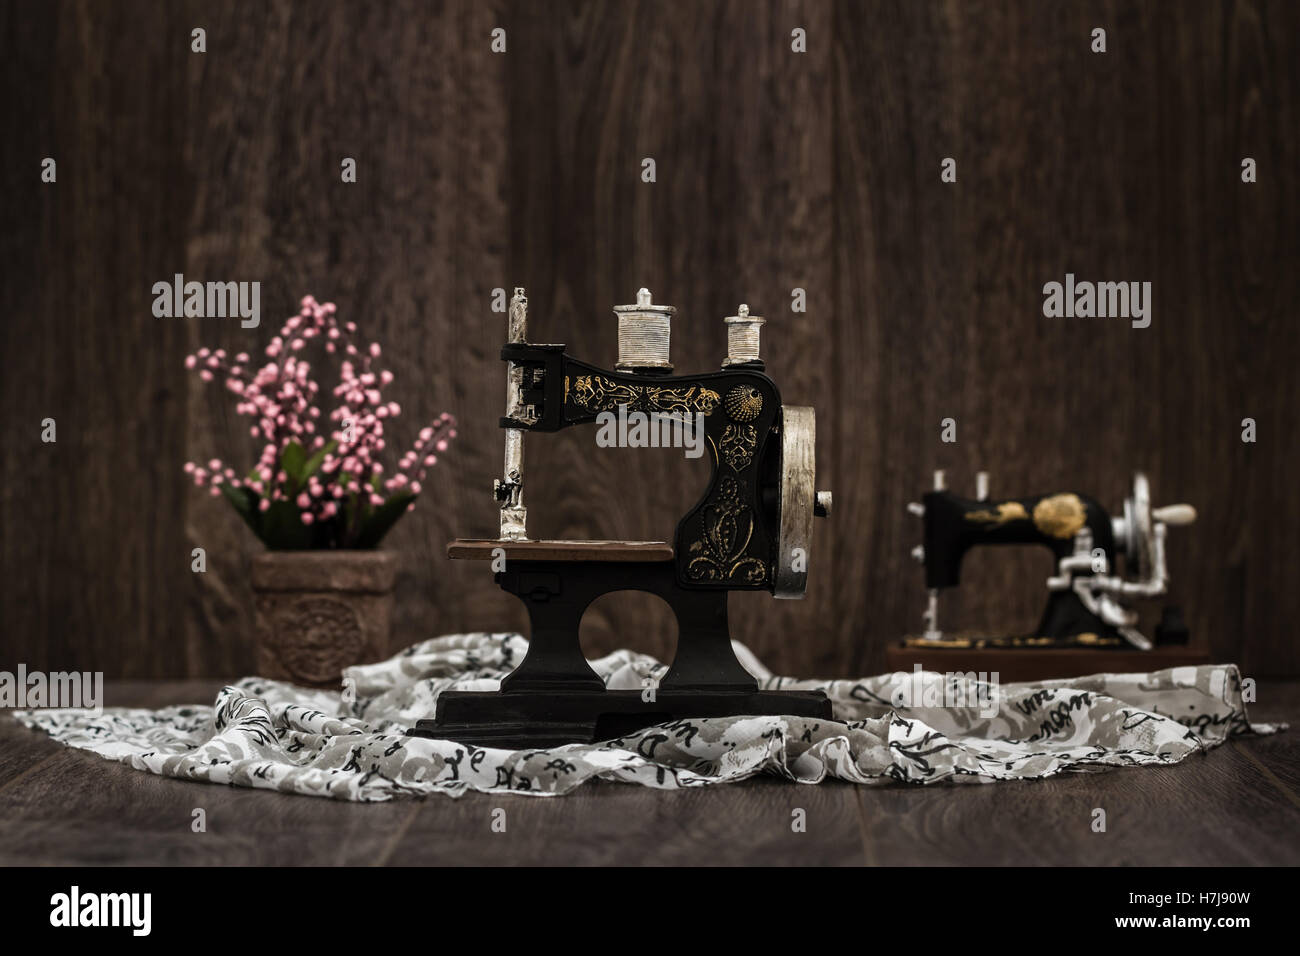 Small nostalgic decorative sewing machine on brown wooden background Stock Photo